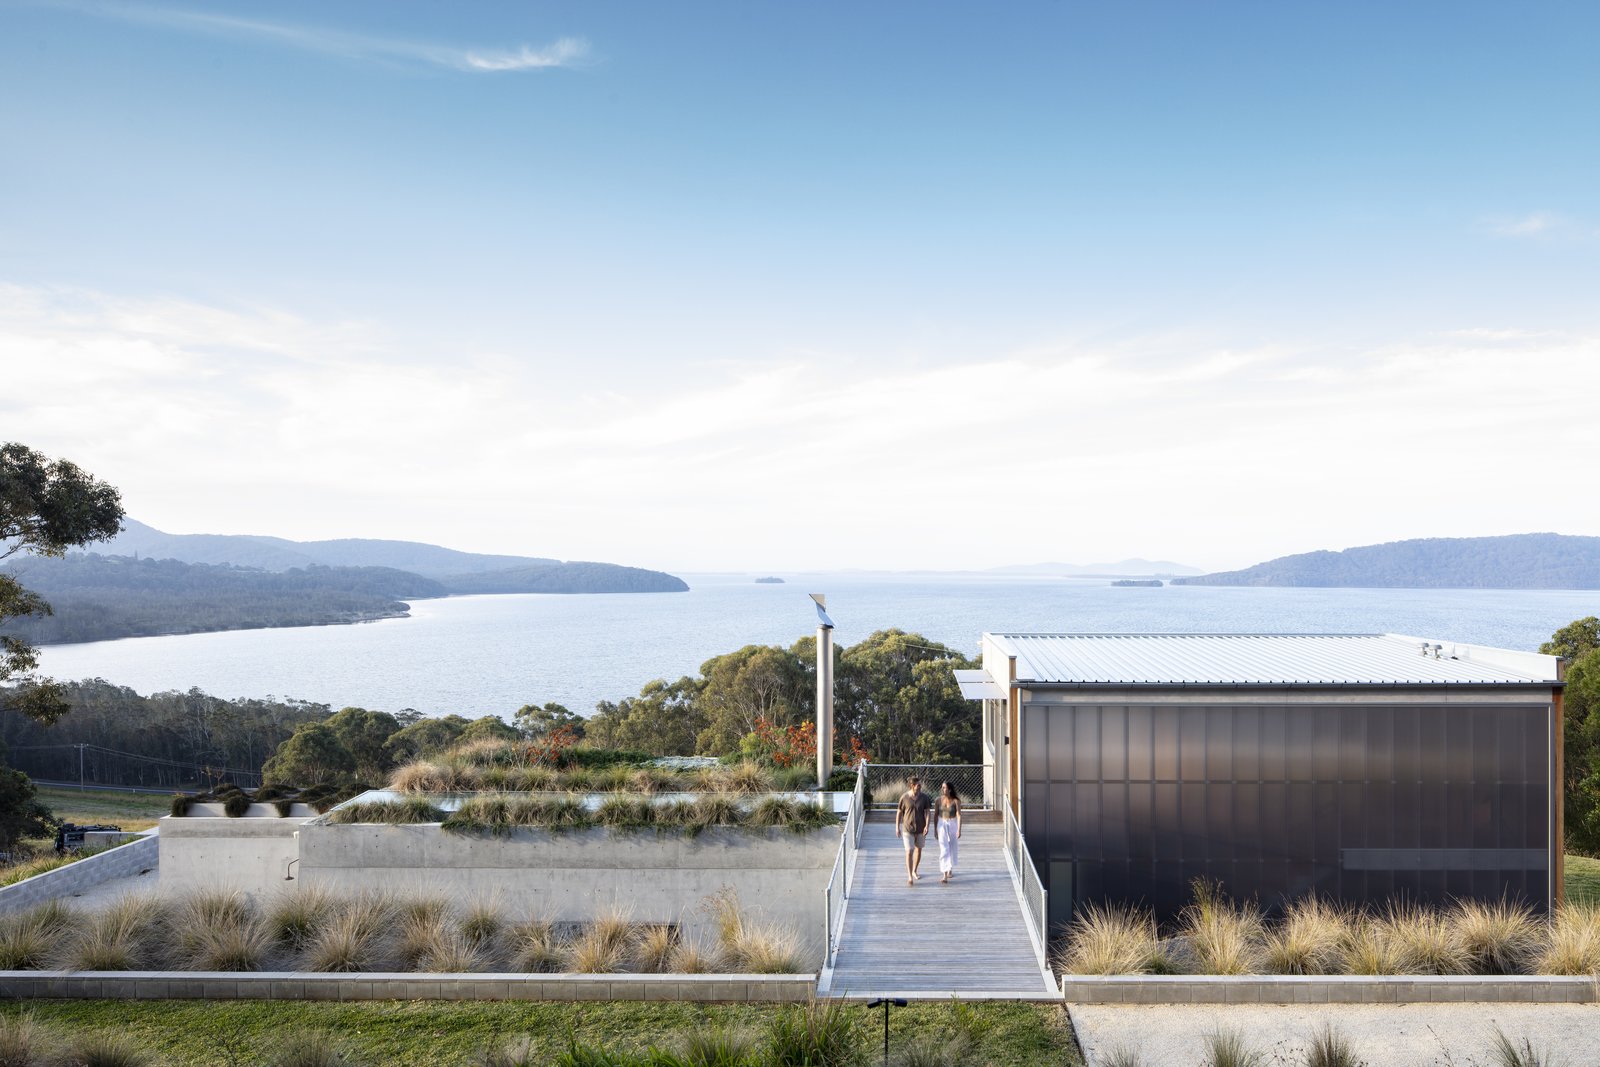 Approaching the home from above, guests encounter a green roof that feels united with the landscape beyond. The entry sequence presents purposefully framed views that hide and reveal the lake.